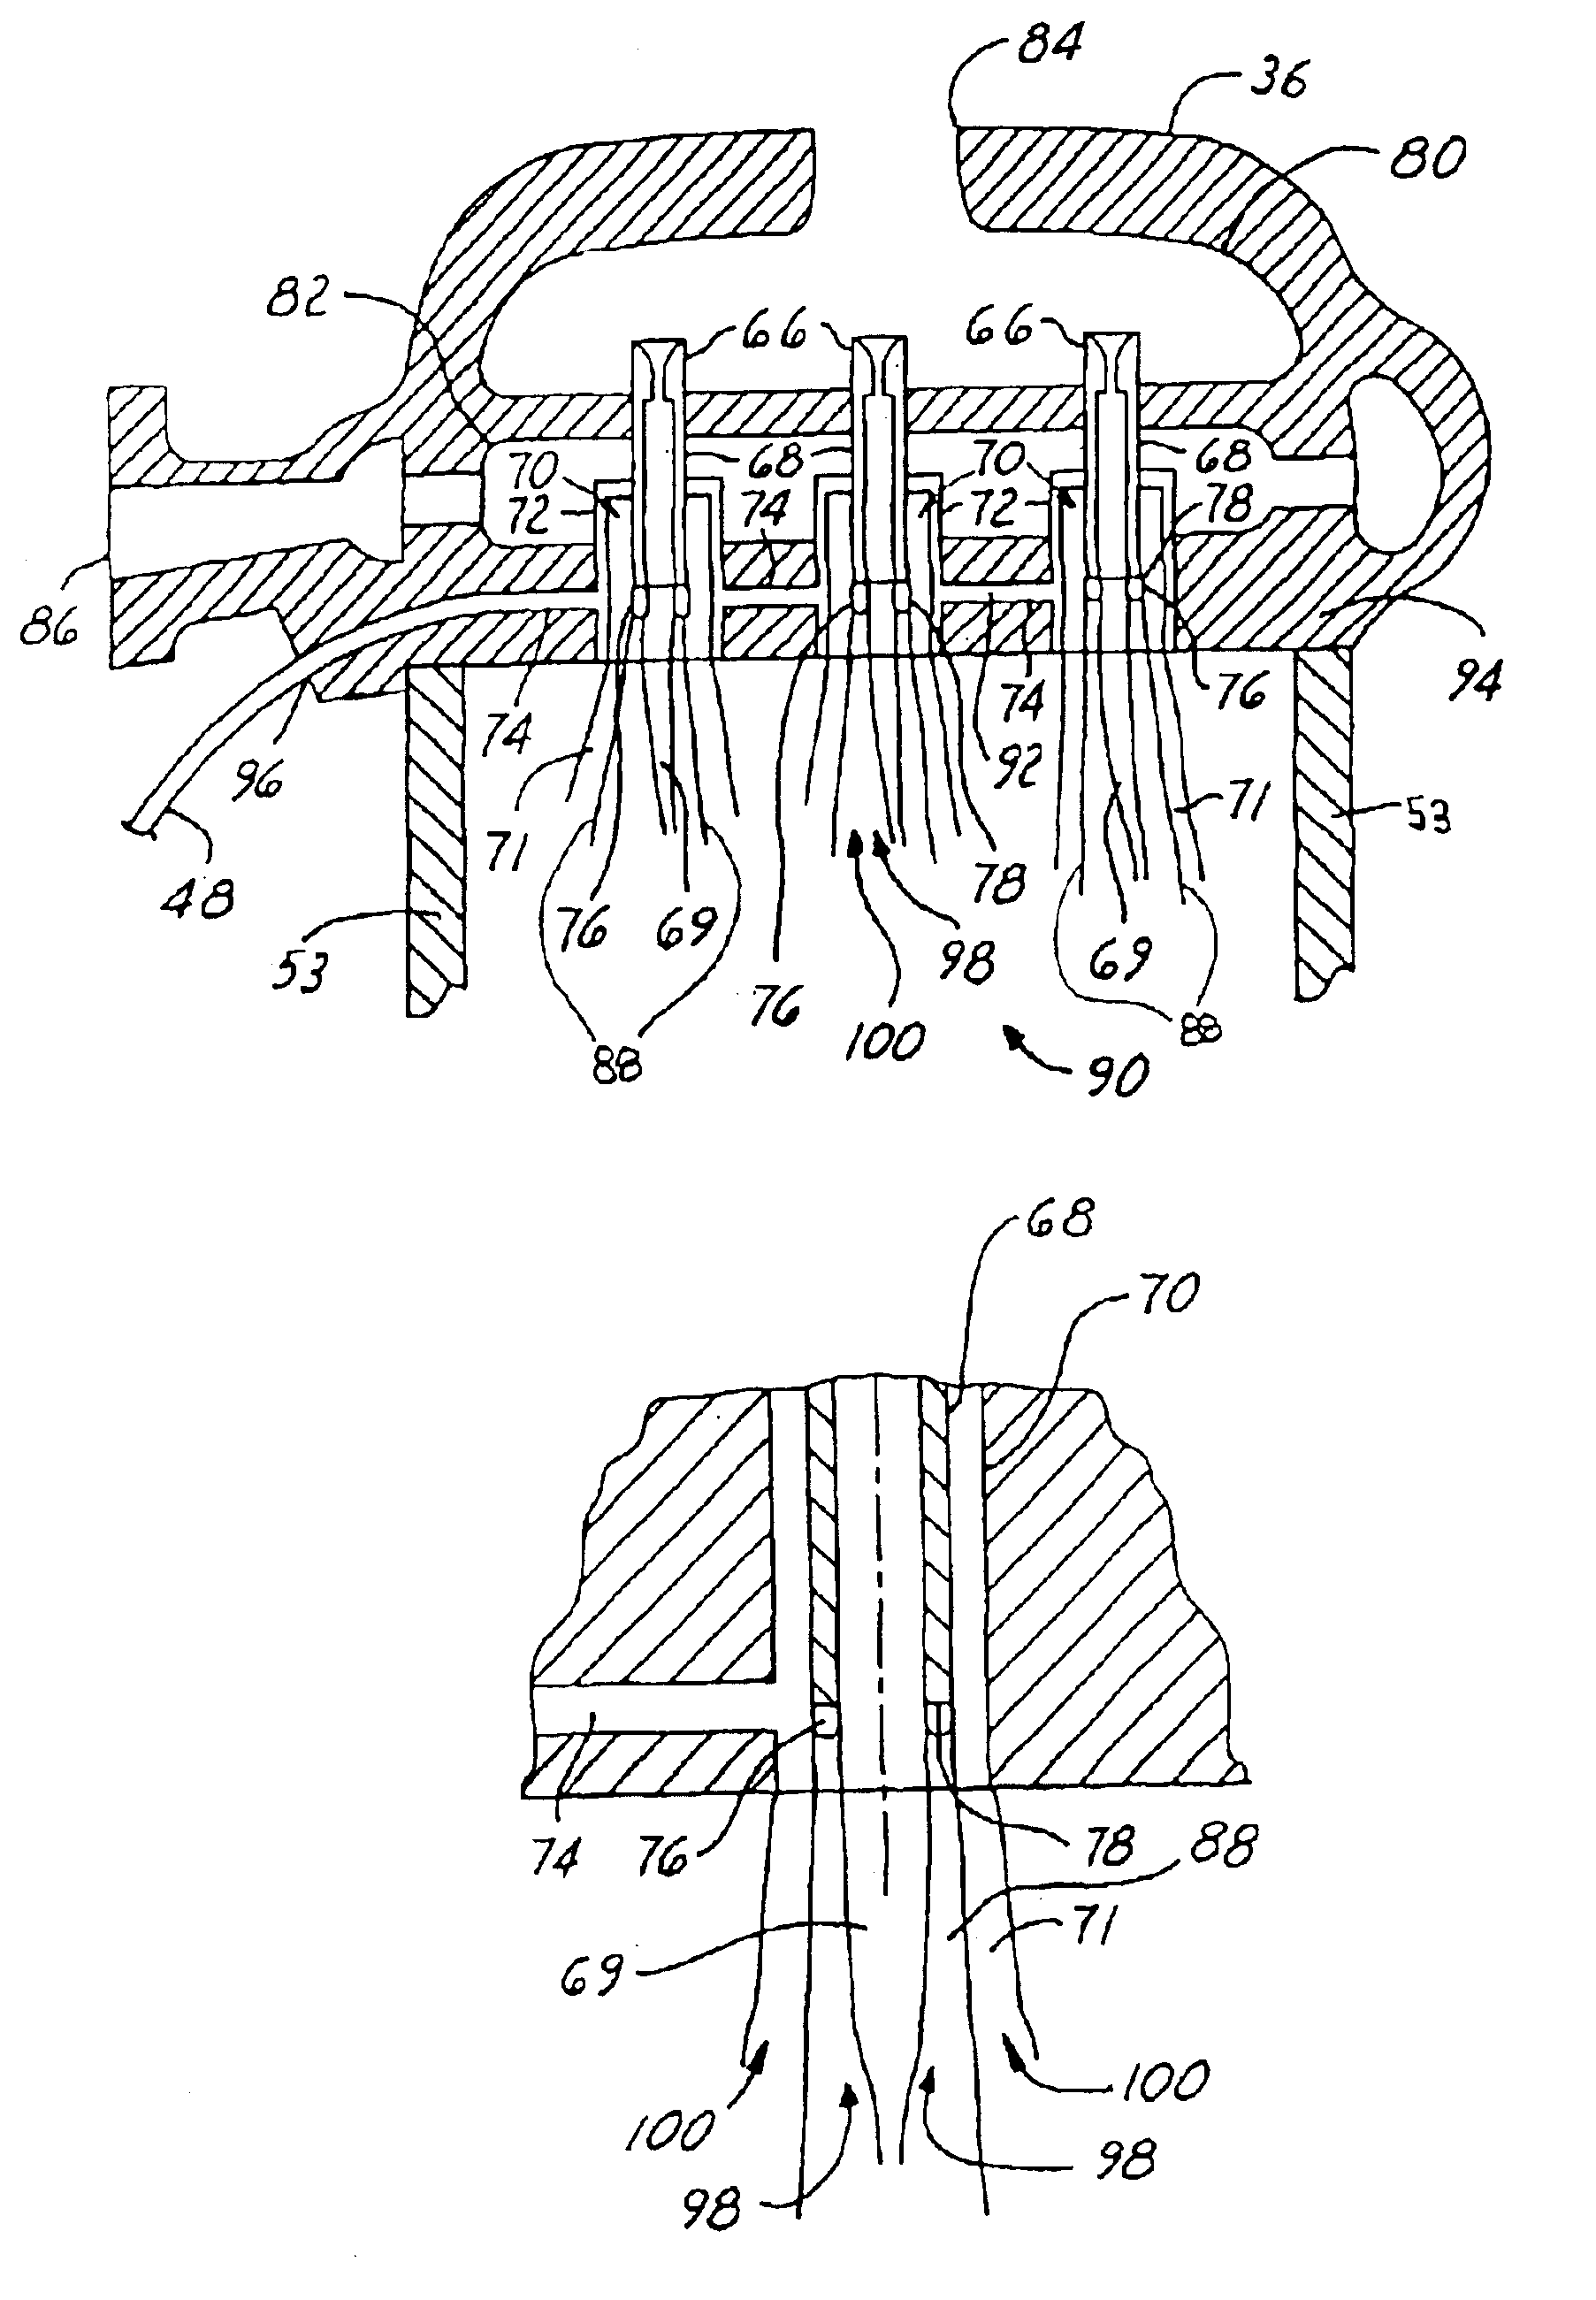 Bi-propellant injector with flame-holding zone igniter